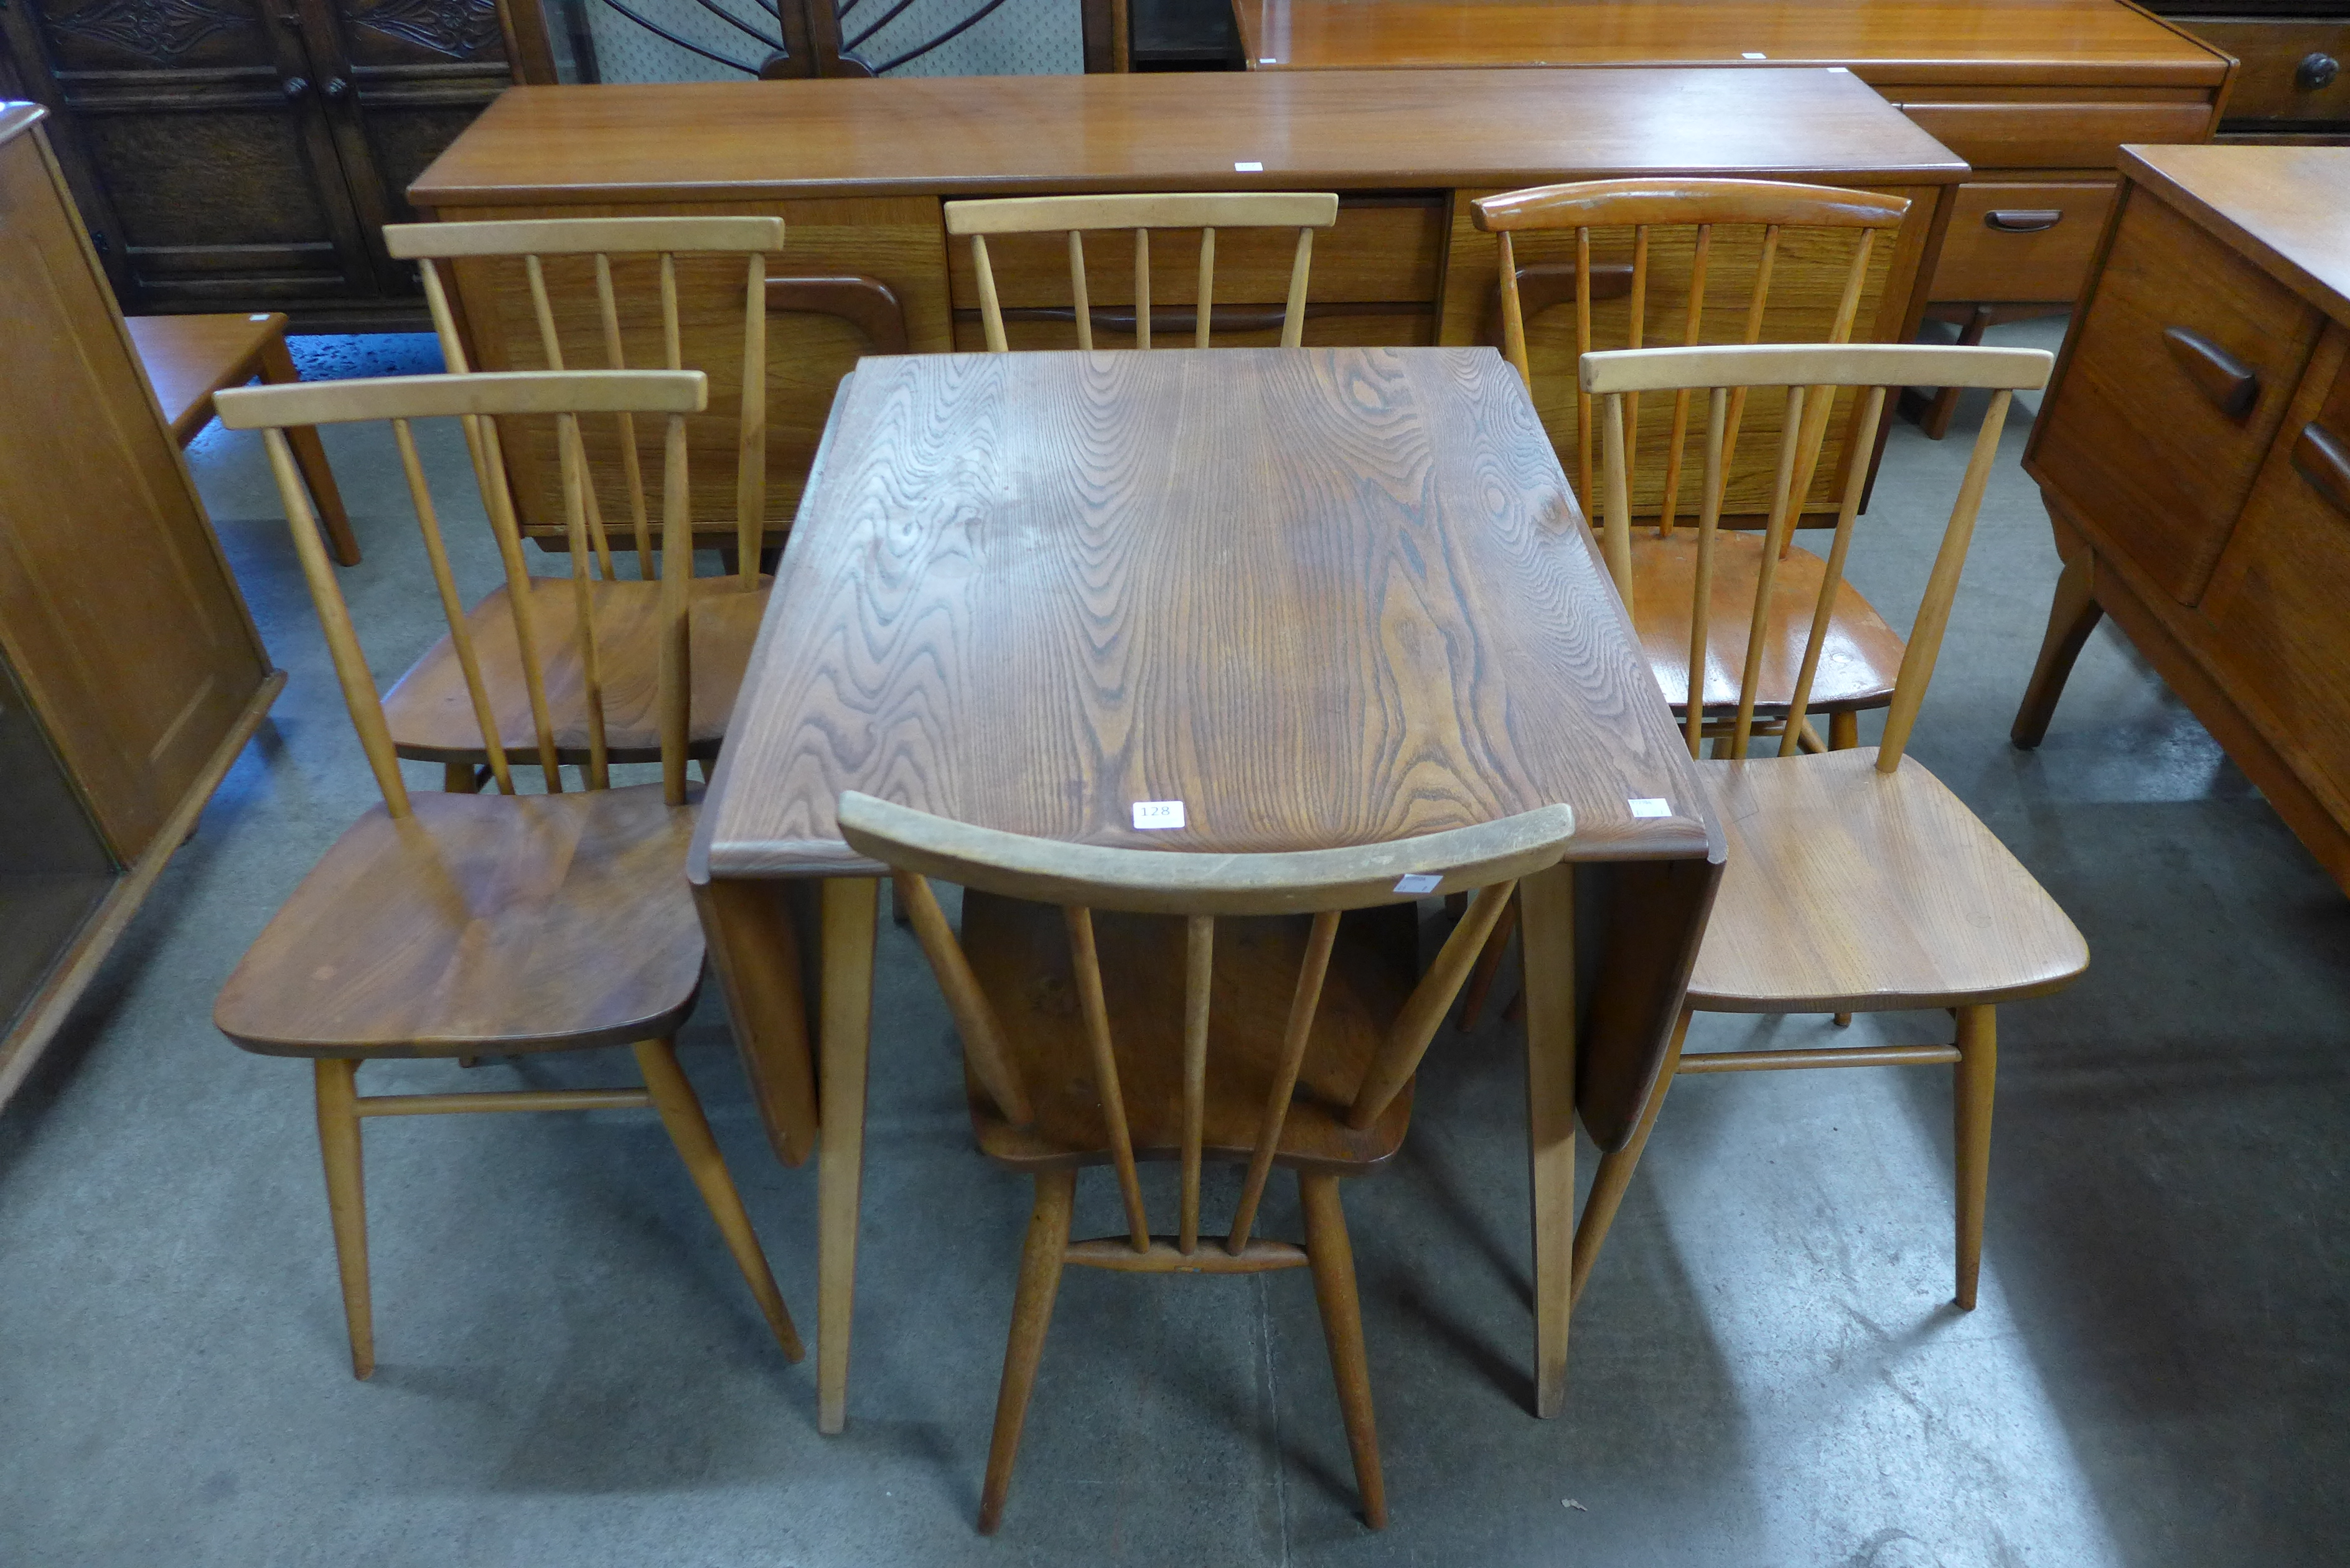 An Ercol drop-leaf table and six chairs